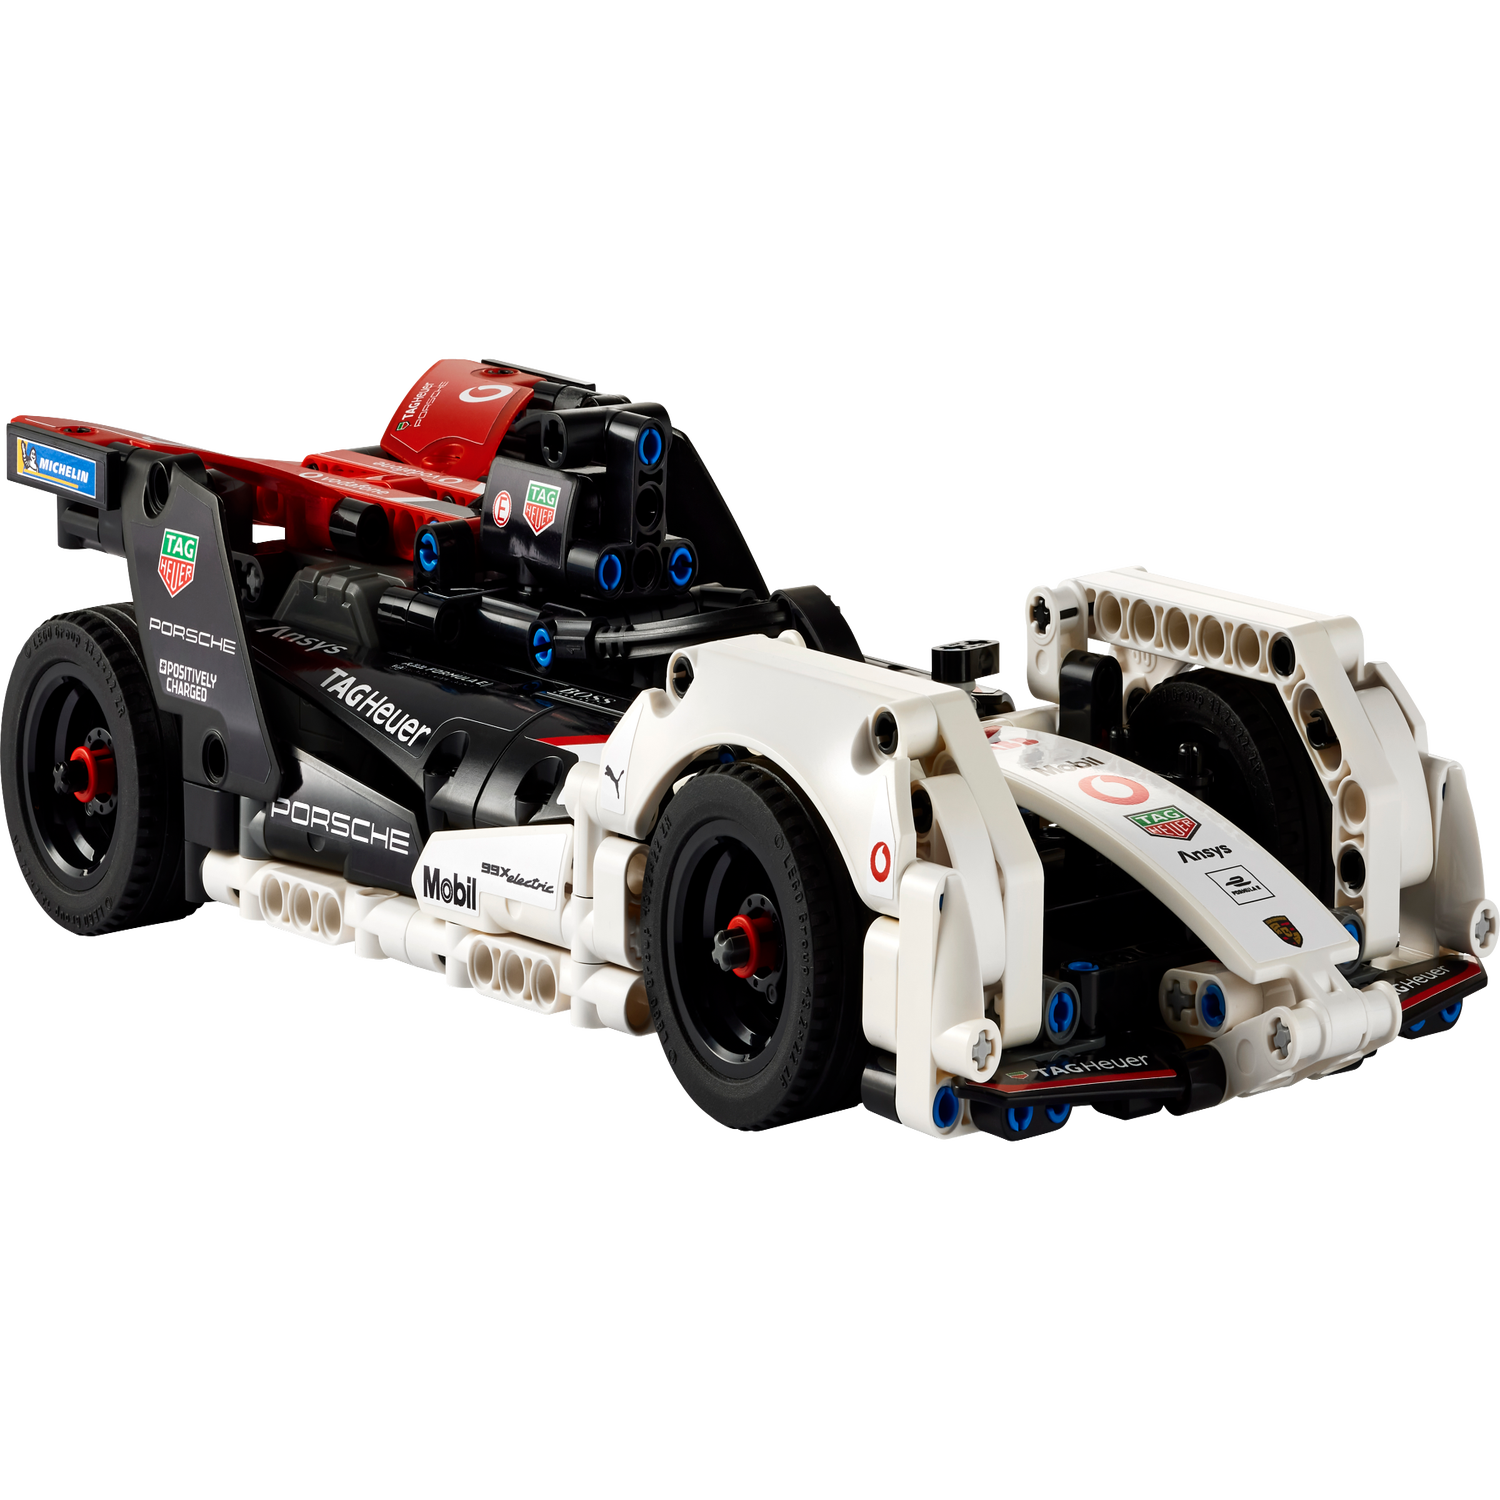 Rally Car 42077 | Technic™ | Buy online at the Official LEGO® Shop US